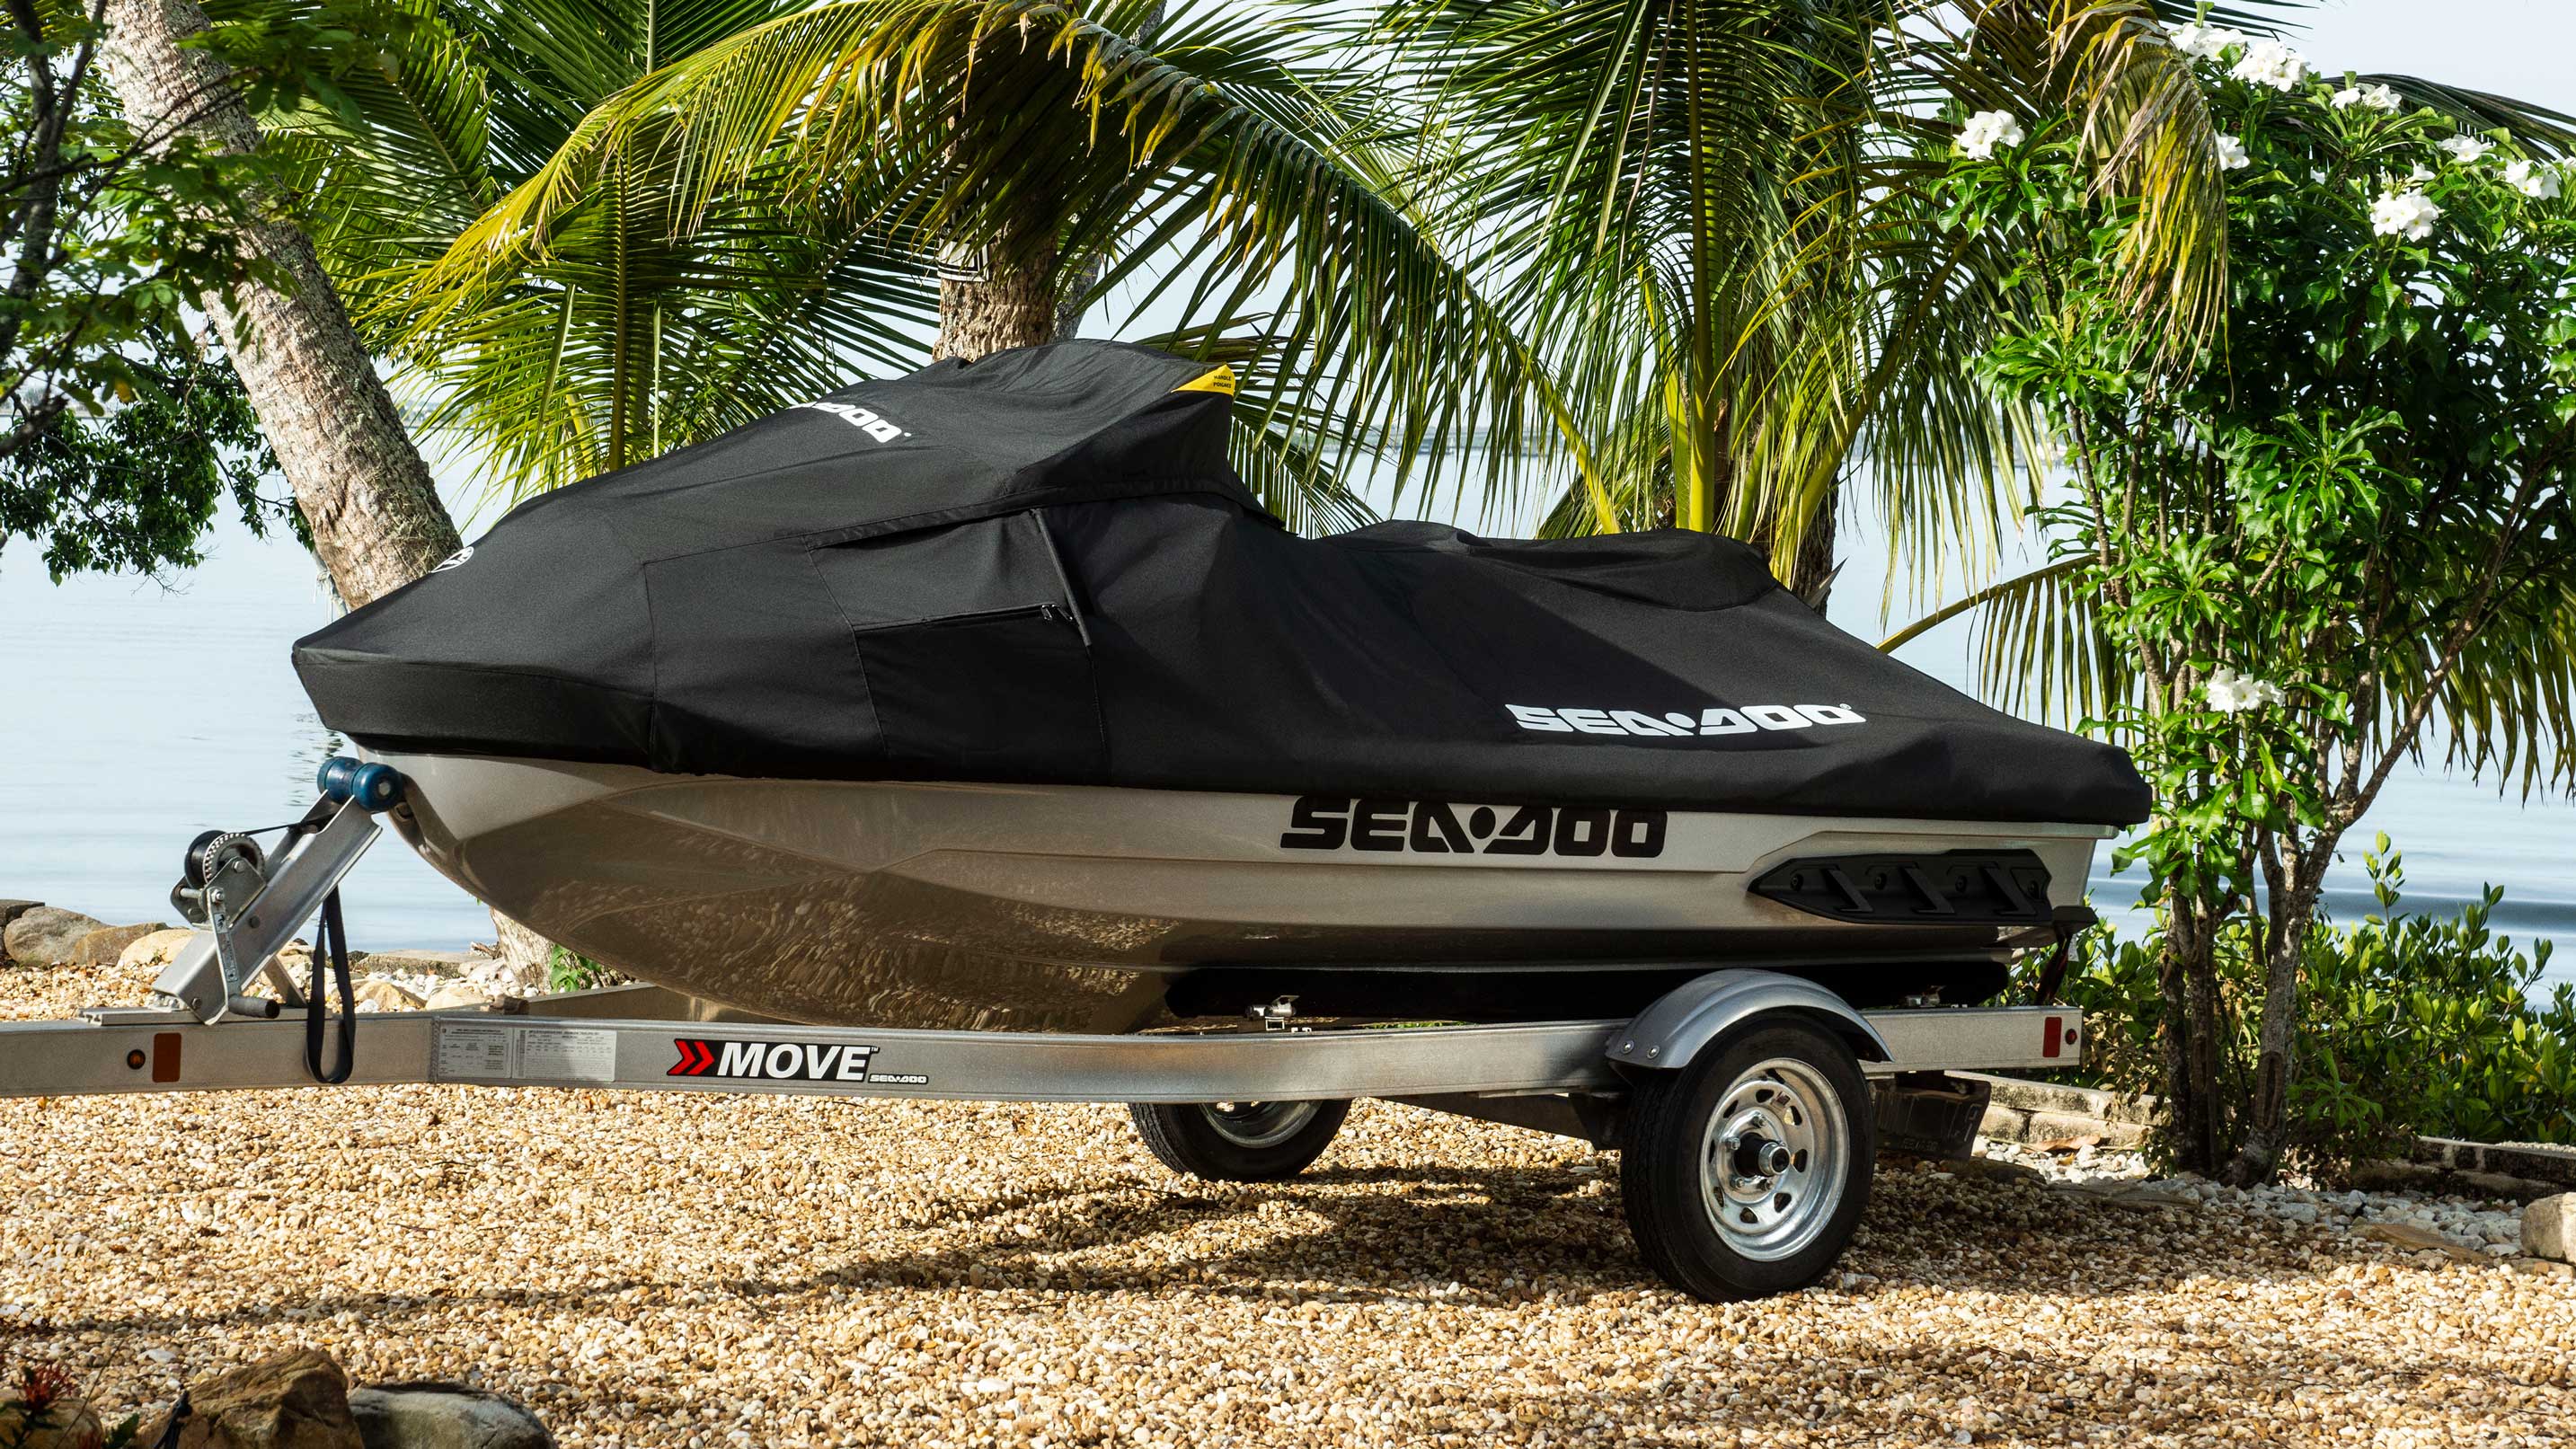 A covered Sea-Doo on a truck bed